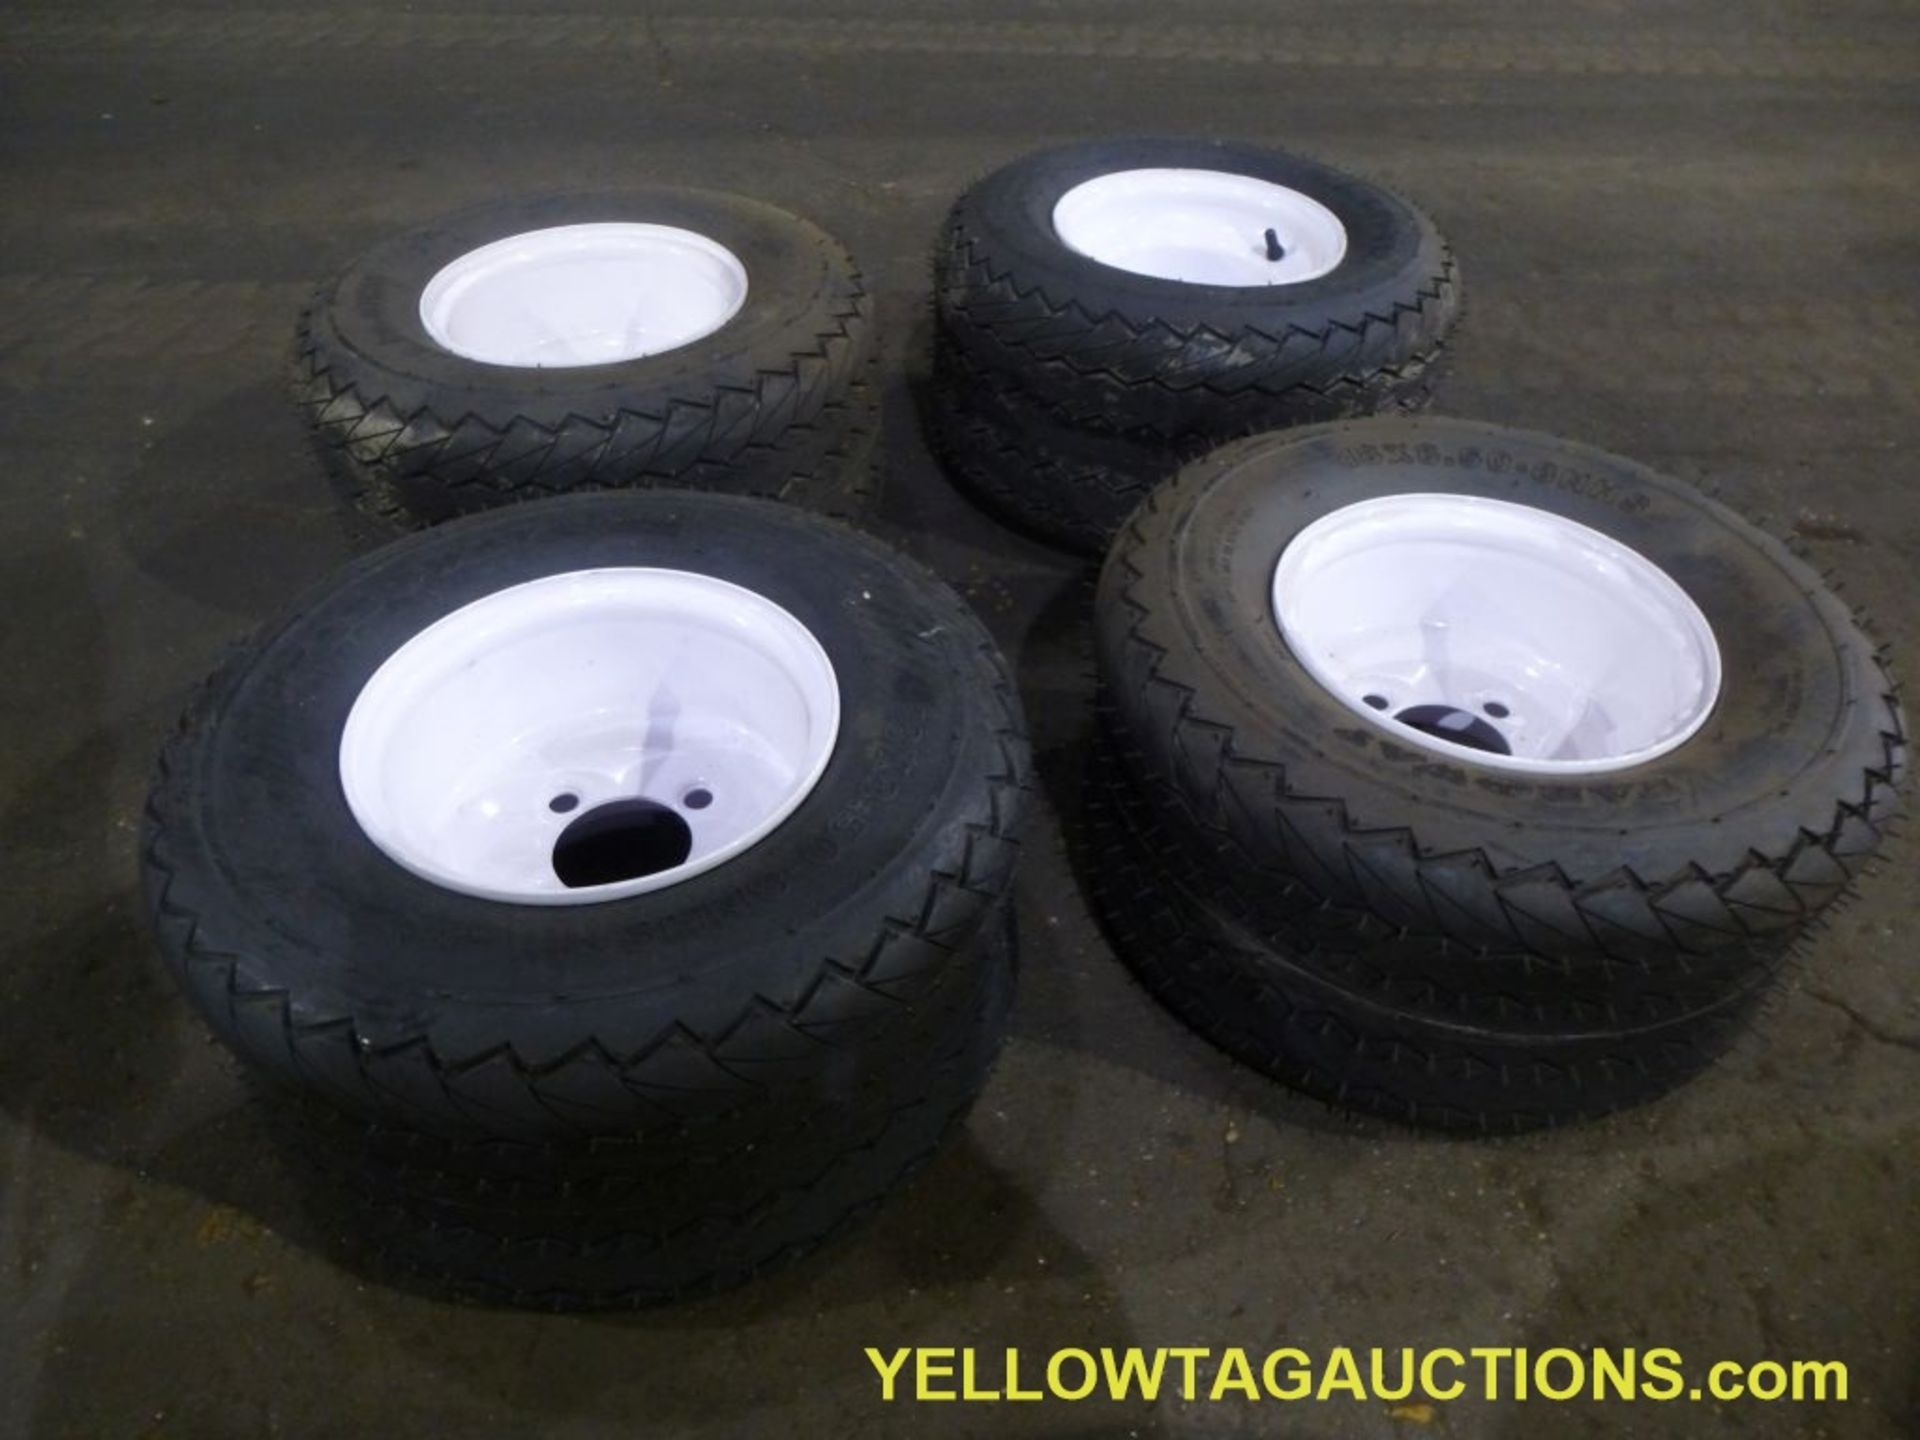 Lot of (12) FarWay 6-Ply Nylon Tires & Wheels|18 X 8.50 - 8NHS|Tag: 432 - Image 2 of 8